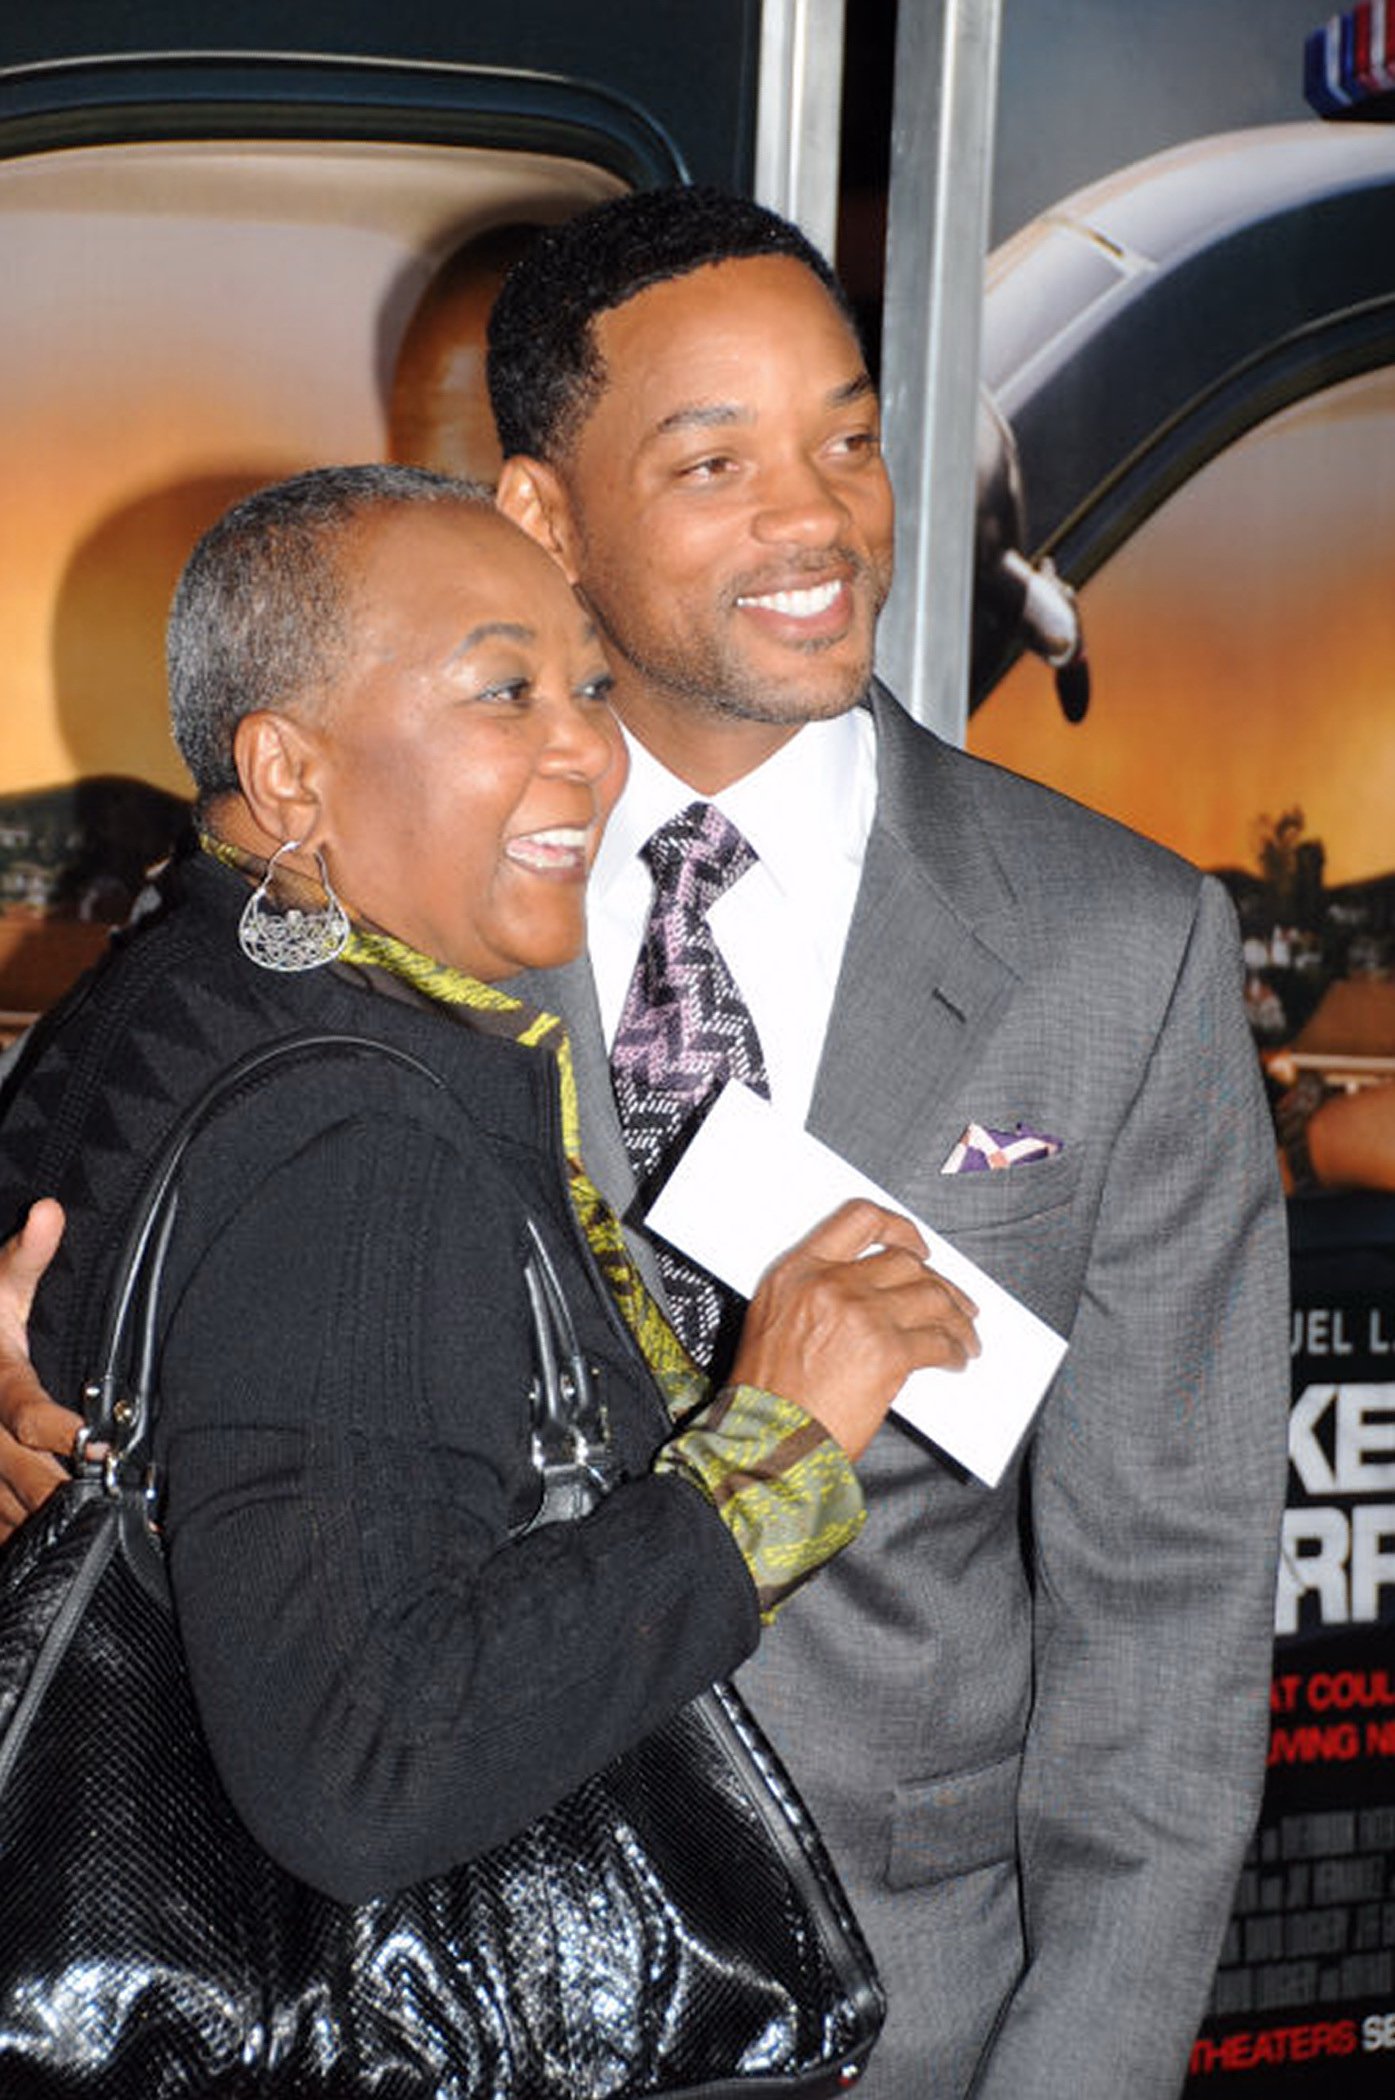 Carolyn and Will Smith at the premiere of the movie "Lakeview Terrace" on September 15, 2008. | Source: Richard Corkery/NY Daily News Archive/Getty Images